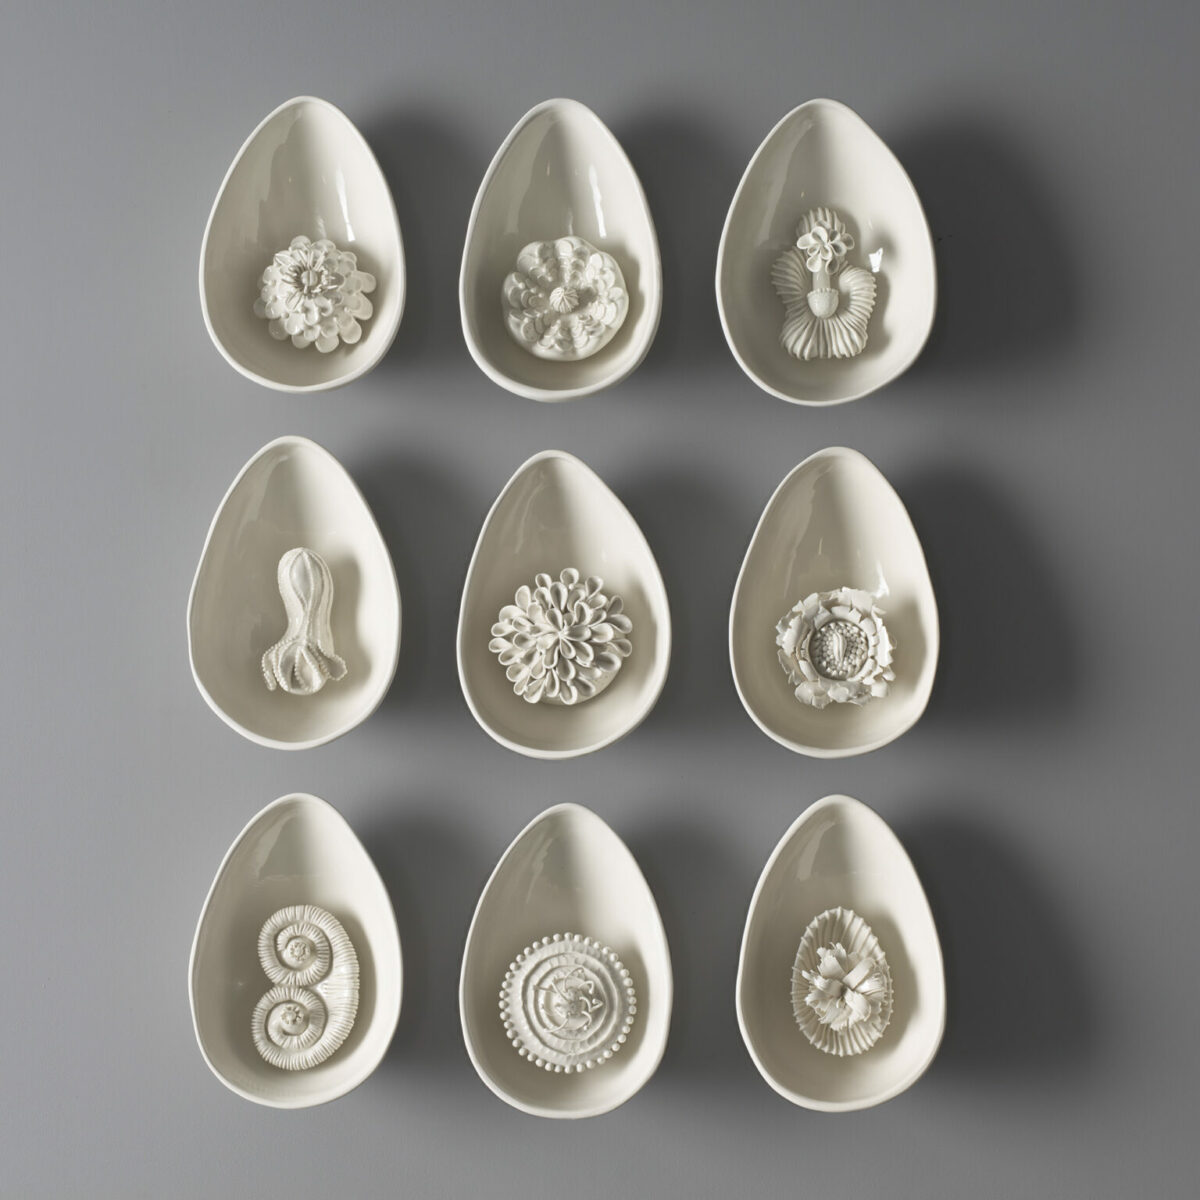 Delicate Porcelain Sculptures Of Cross Cut Pods Encased With Seeds And Other Vegetables By Sally Kent 2